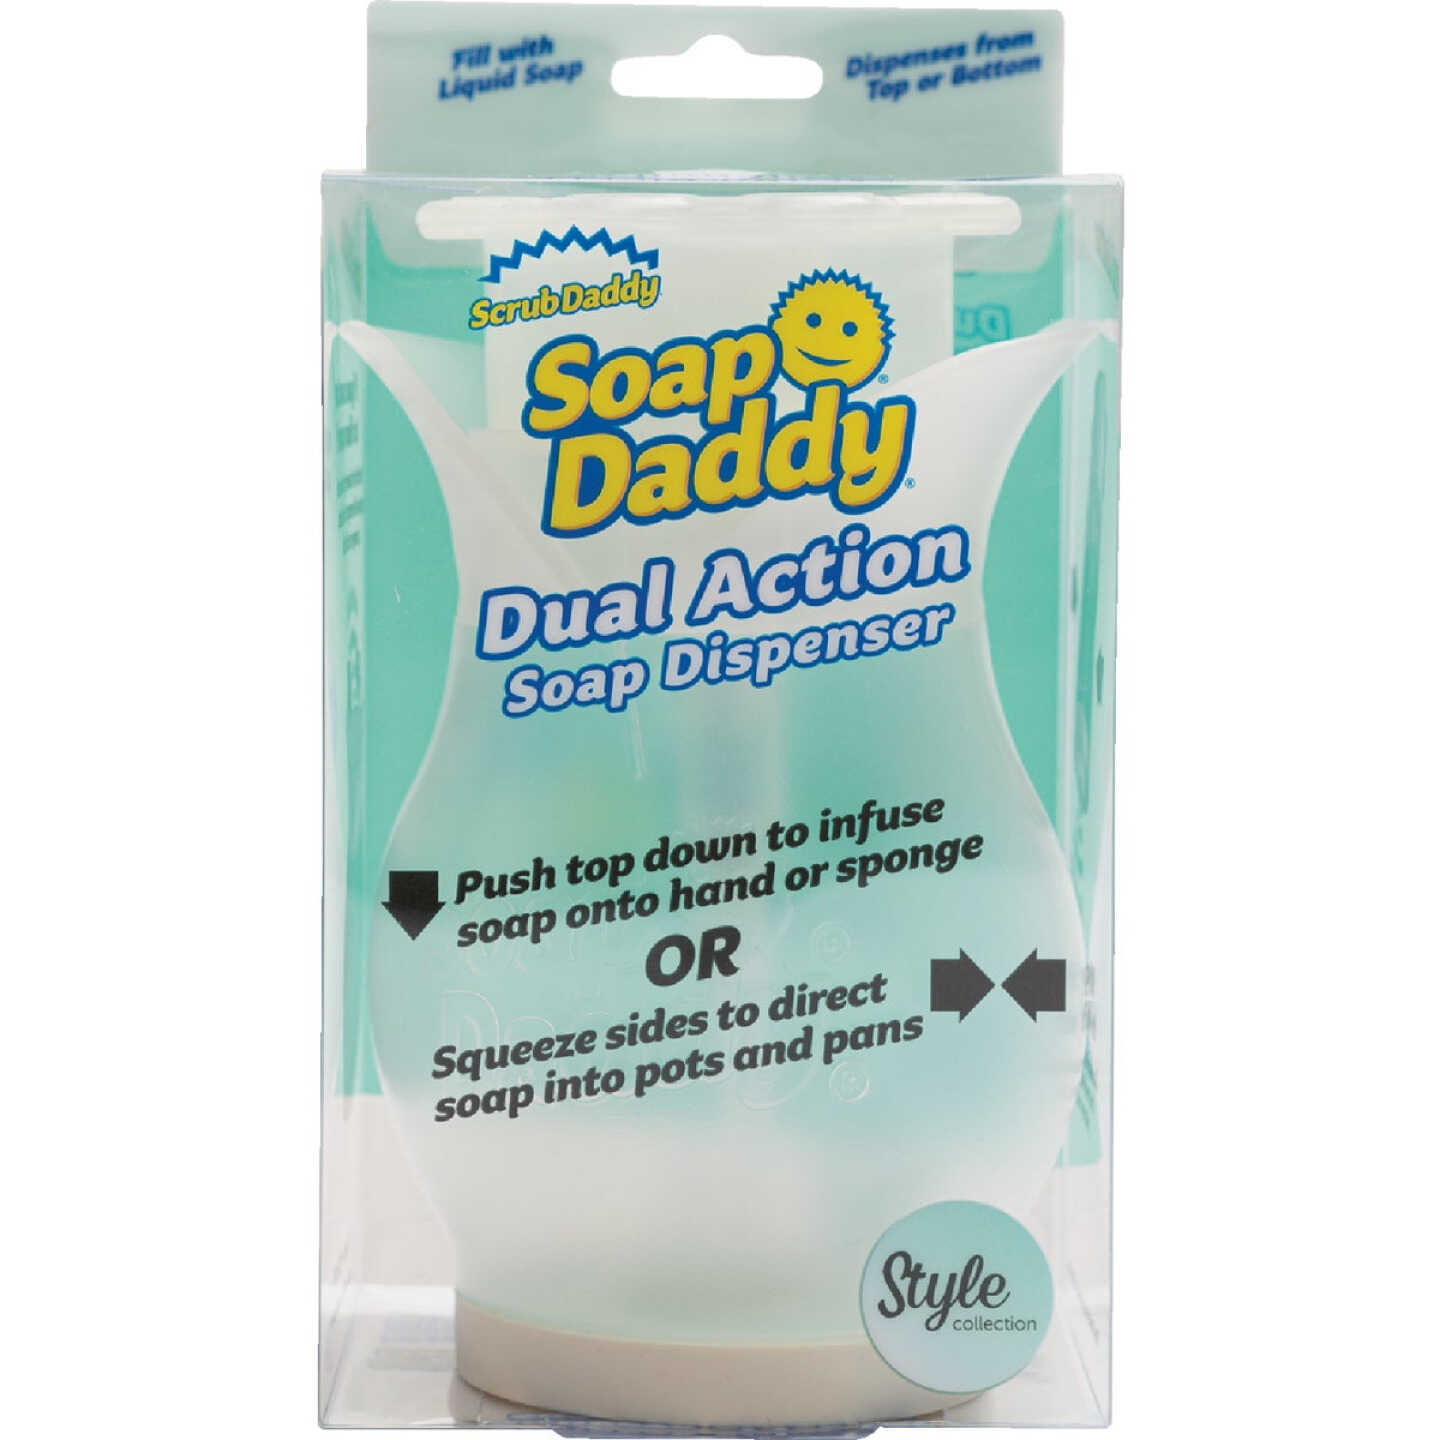 Scrub Daddy Soap Dual Action Dispenser - Pack of 1 for sale online